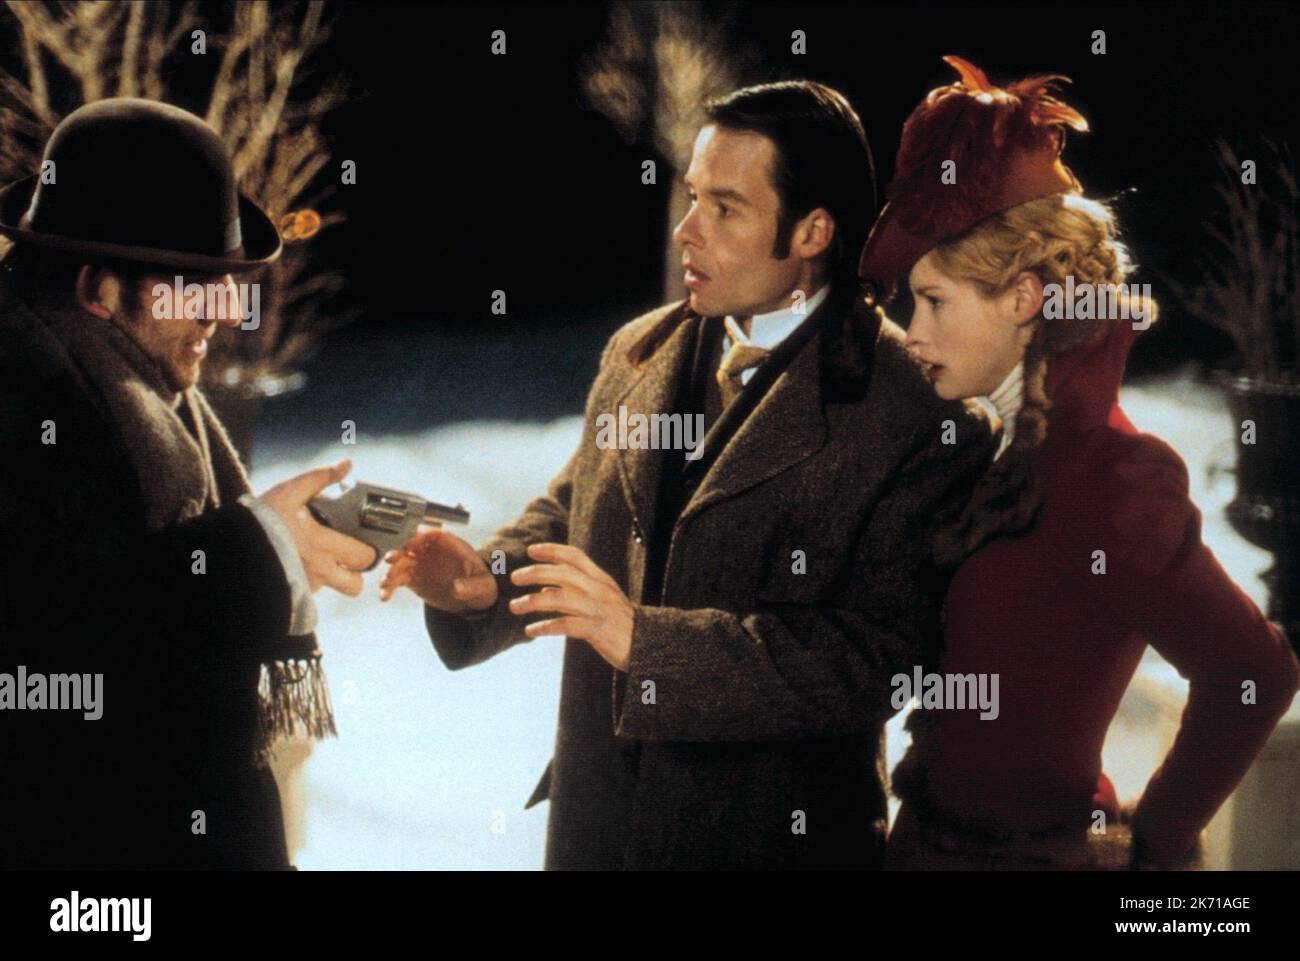 MAX BAKER, GUY PEARCE, SIENNA GUILLORY, THE TIME MACHINE, 2002 Stock Photo